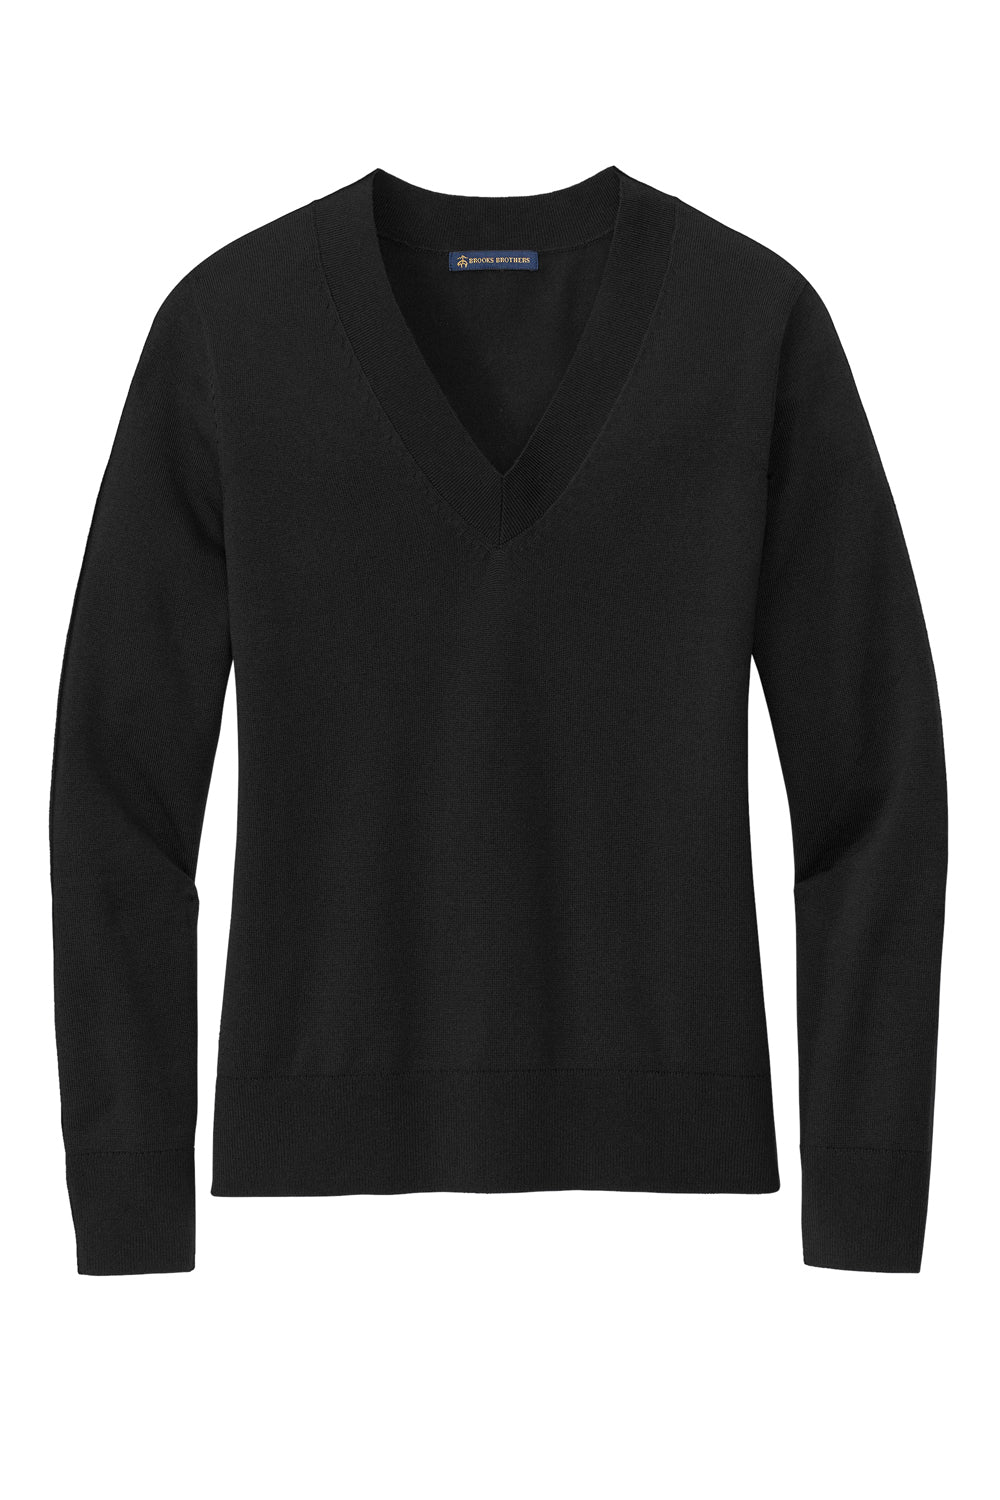 Brooks Brothers Womens Long Sleeve V-Neck Sweater Deep Black Flat Front